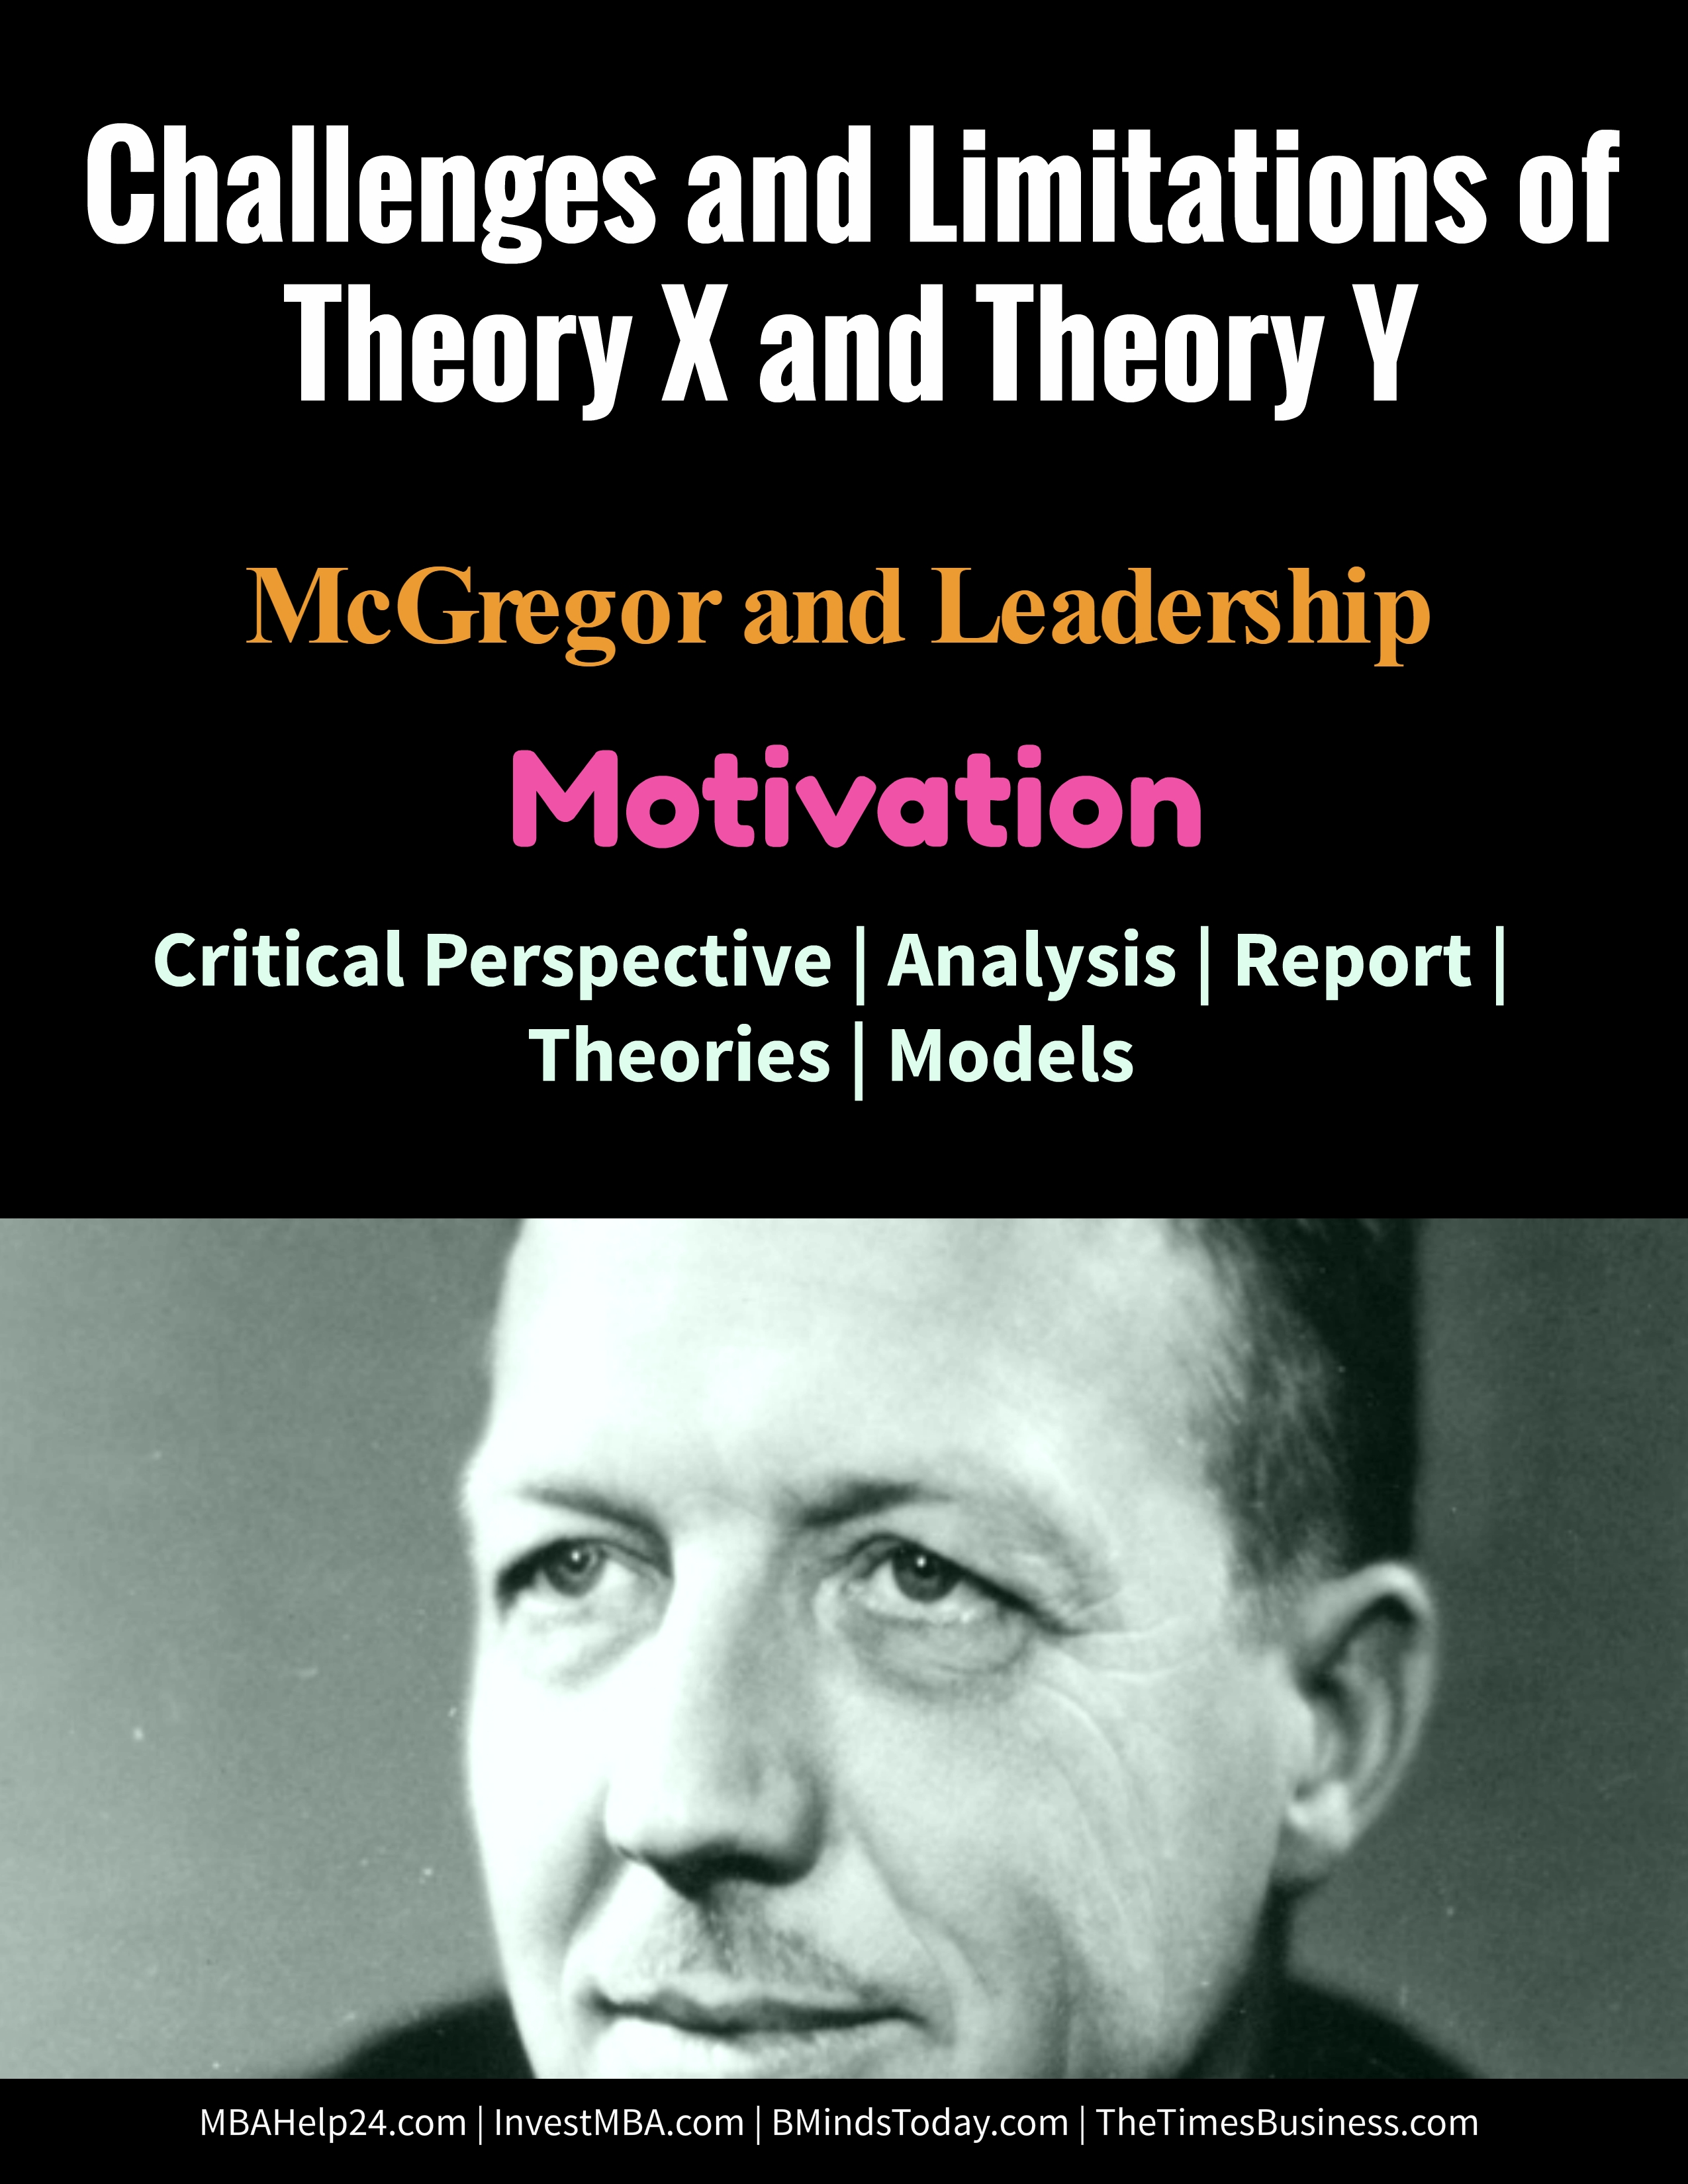 Challenges and Limitations of Theory X and Theory Y | Motivation   limitations of mc gregor theory x and theory y challenges and limitations of theory x and theory y | motivation Challenges and Limitations of Theory X and Theory Y | Motivation limitations of mc gregor theory x and theory y